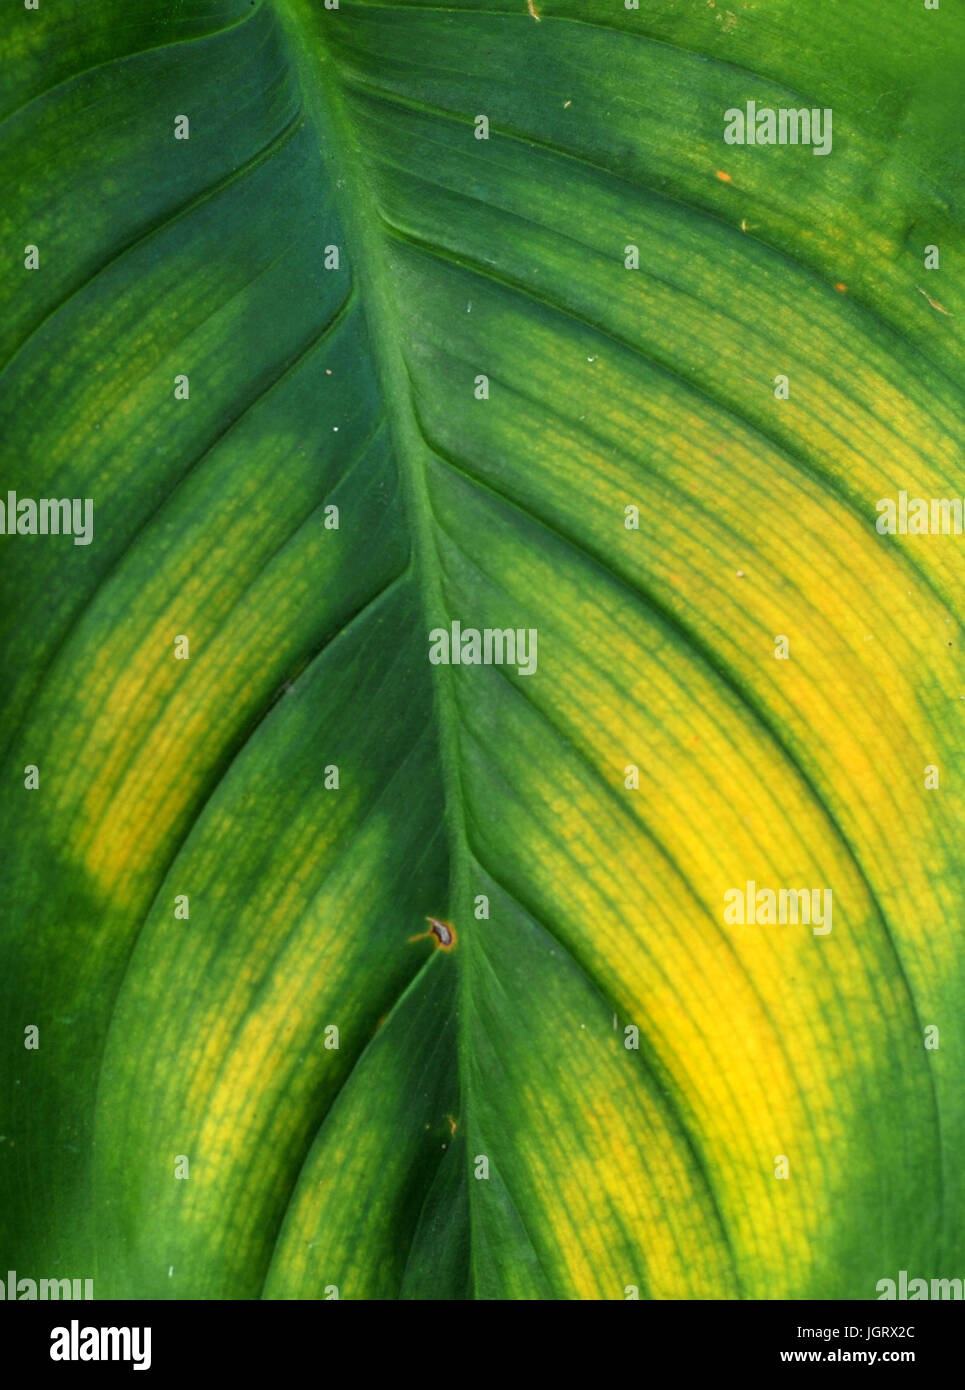 Wet golden yellow color alocasia leaf,yellow texture,leaf detail,canvas painting design,black leaf,nature,textured leaf,with water droplets